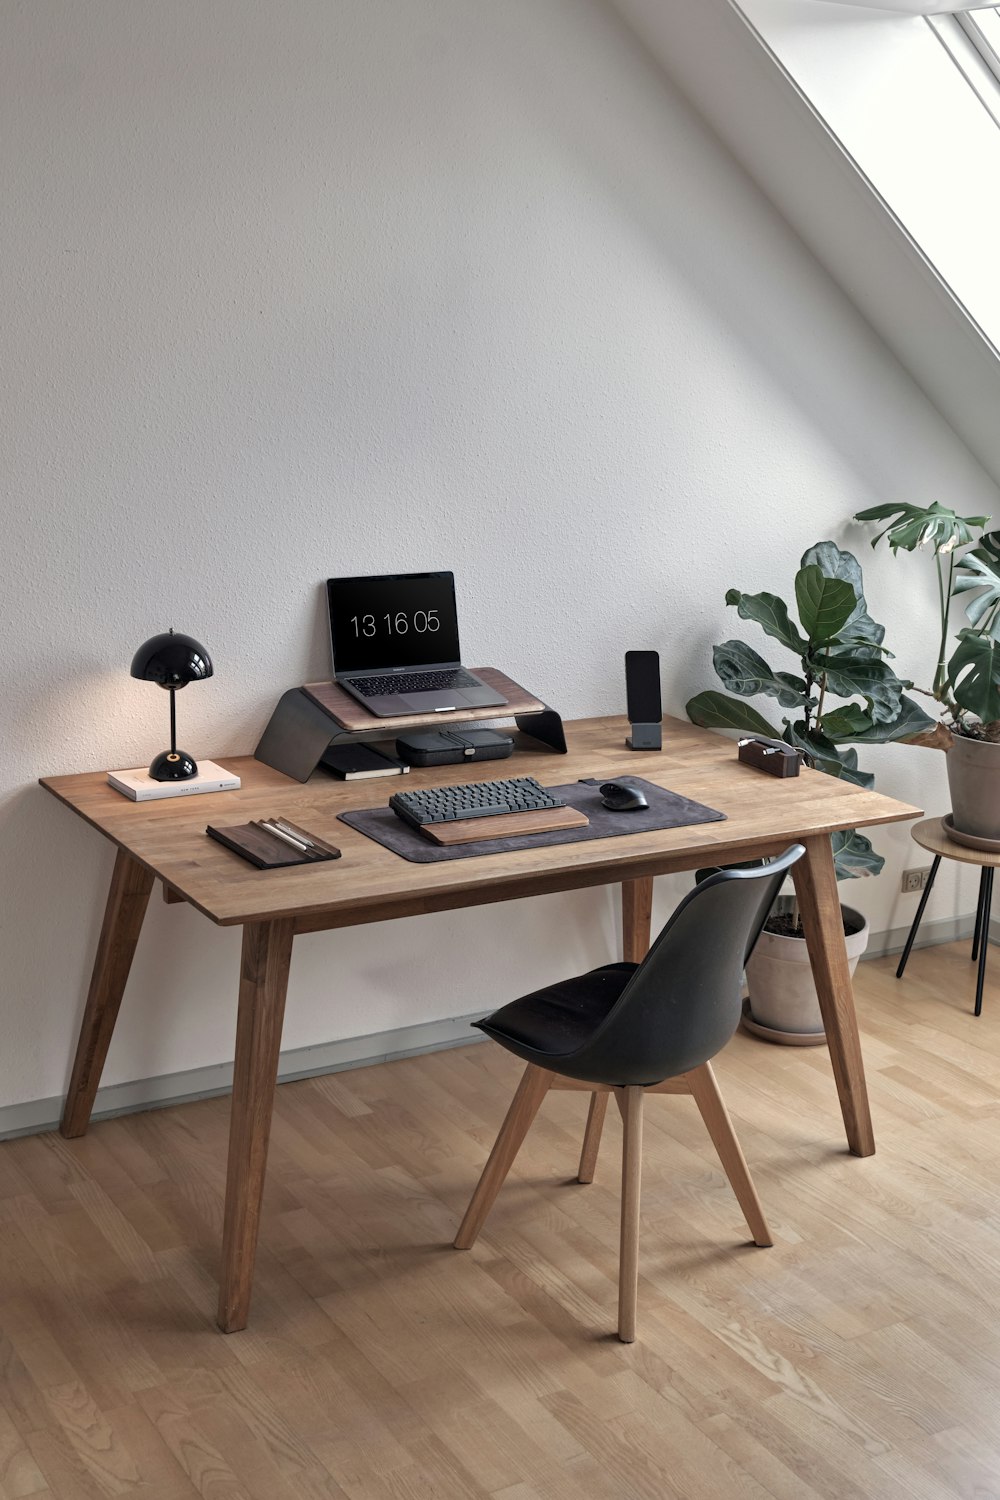 a desk with a laptop and other objects on it